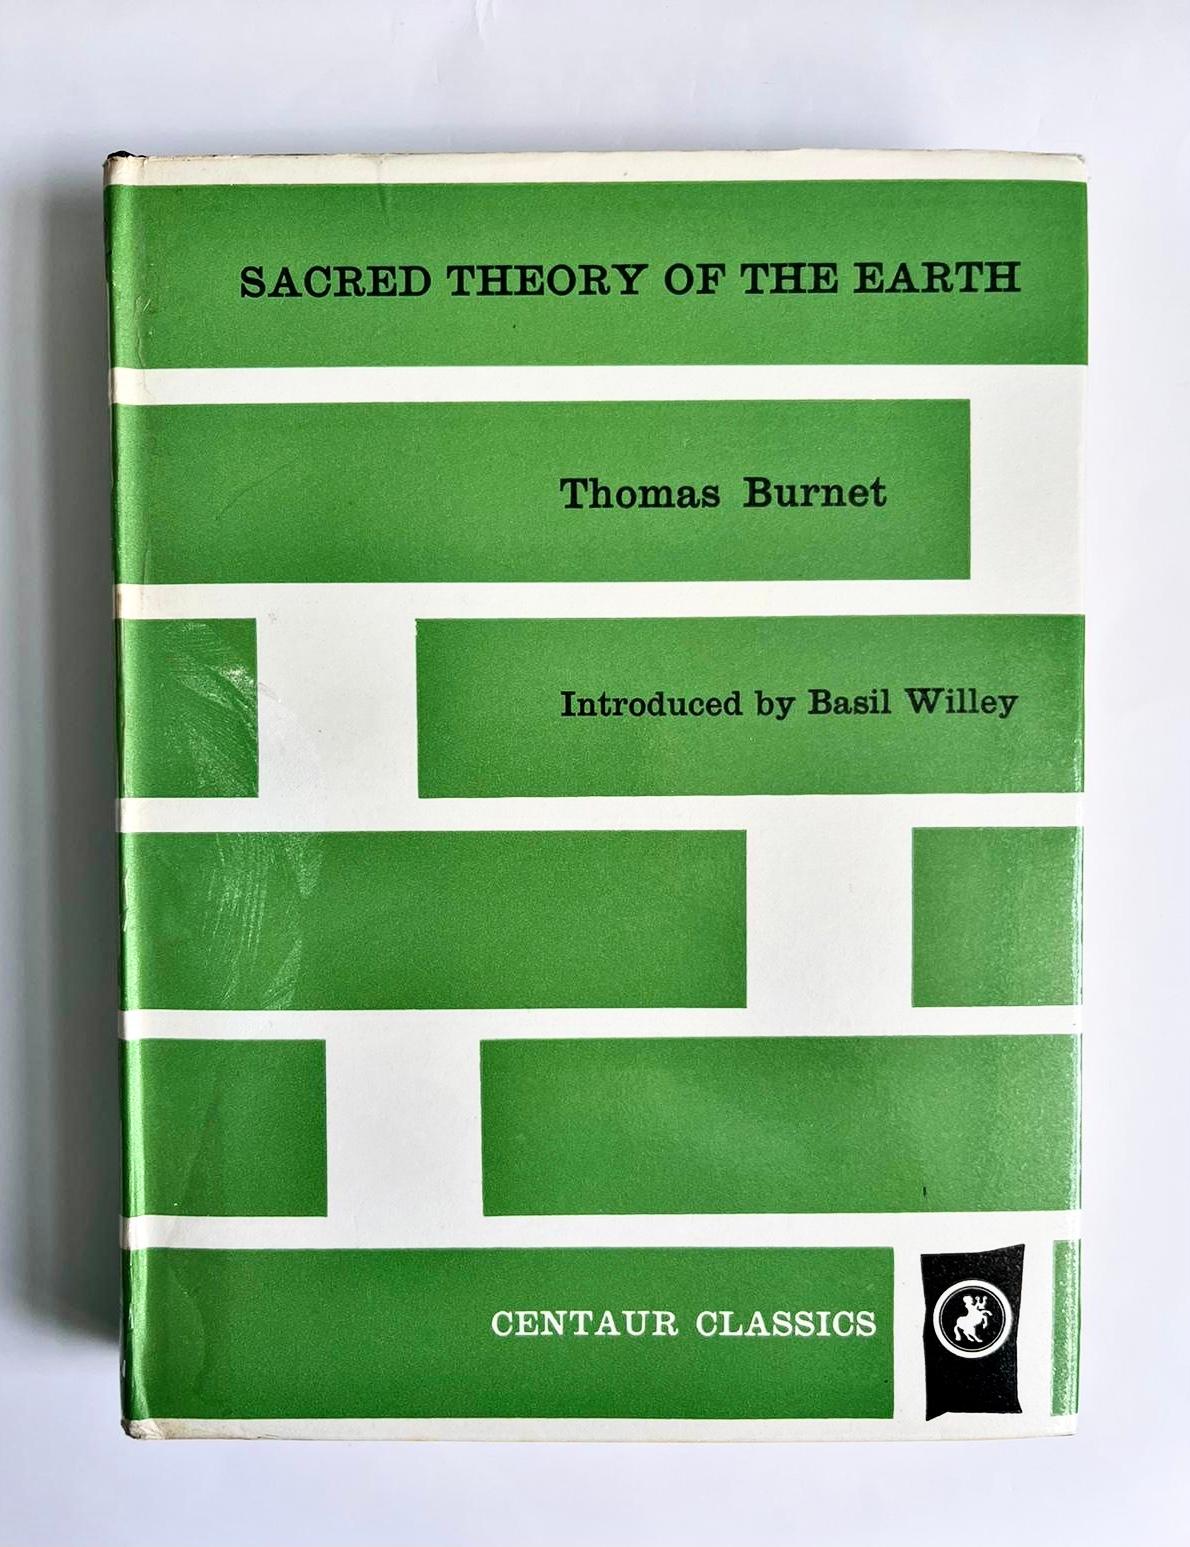 The Sacred Theory of The Earth by Thomas Burnet